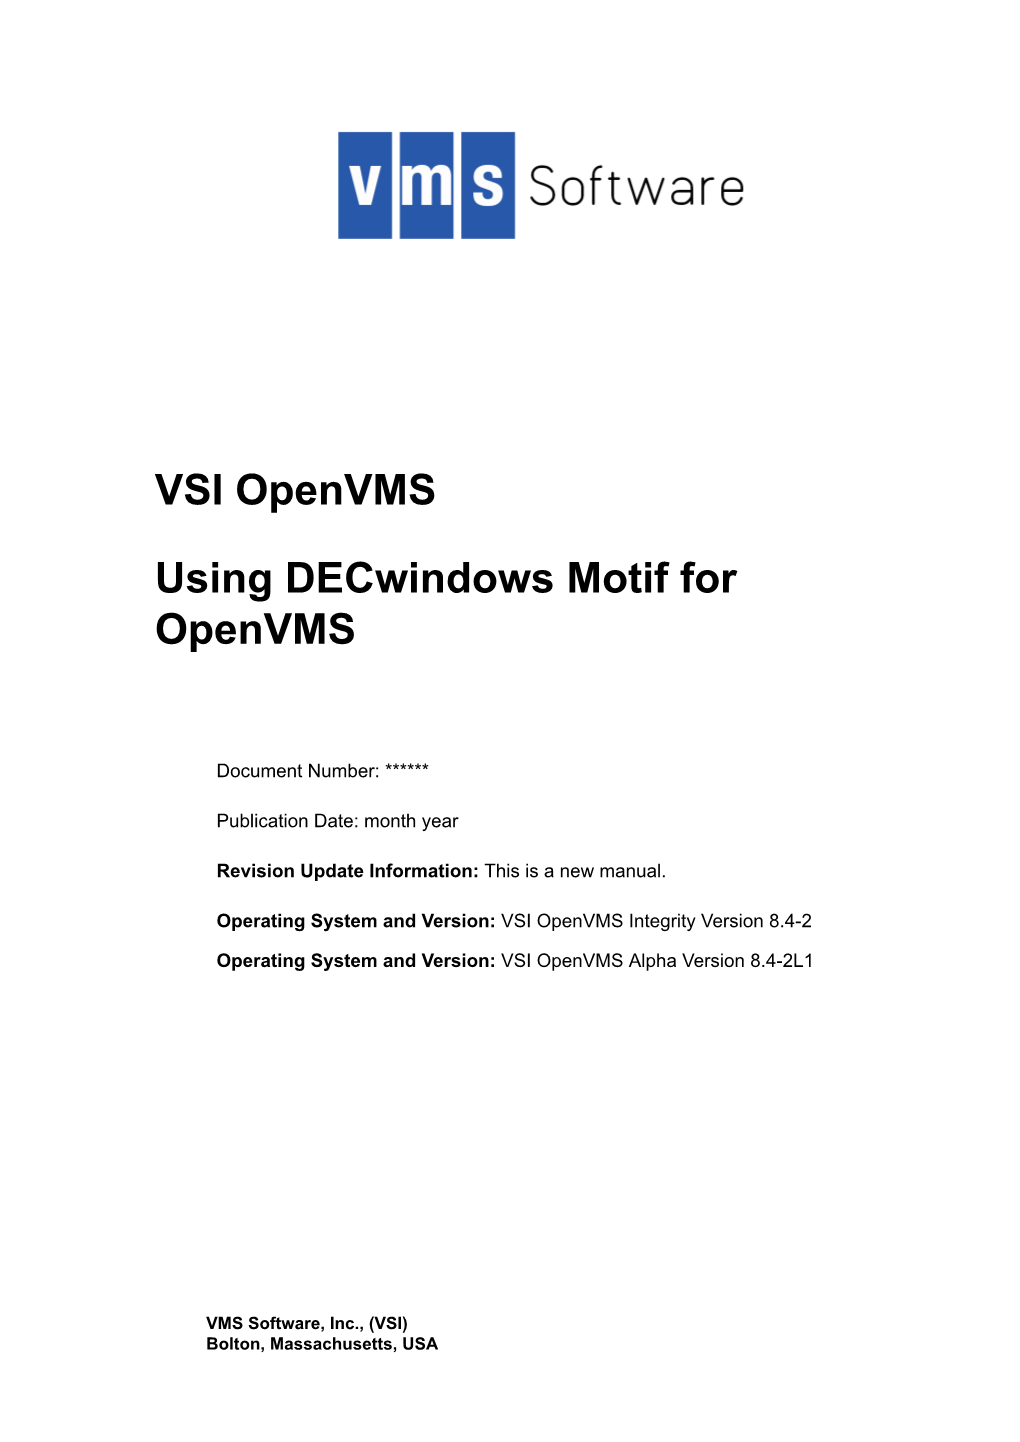 Using Decwindows Motif for Openvms